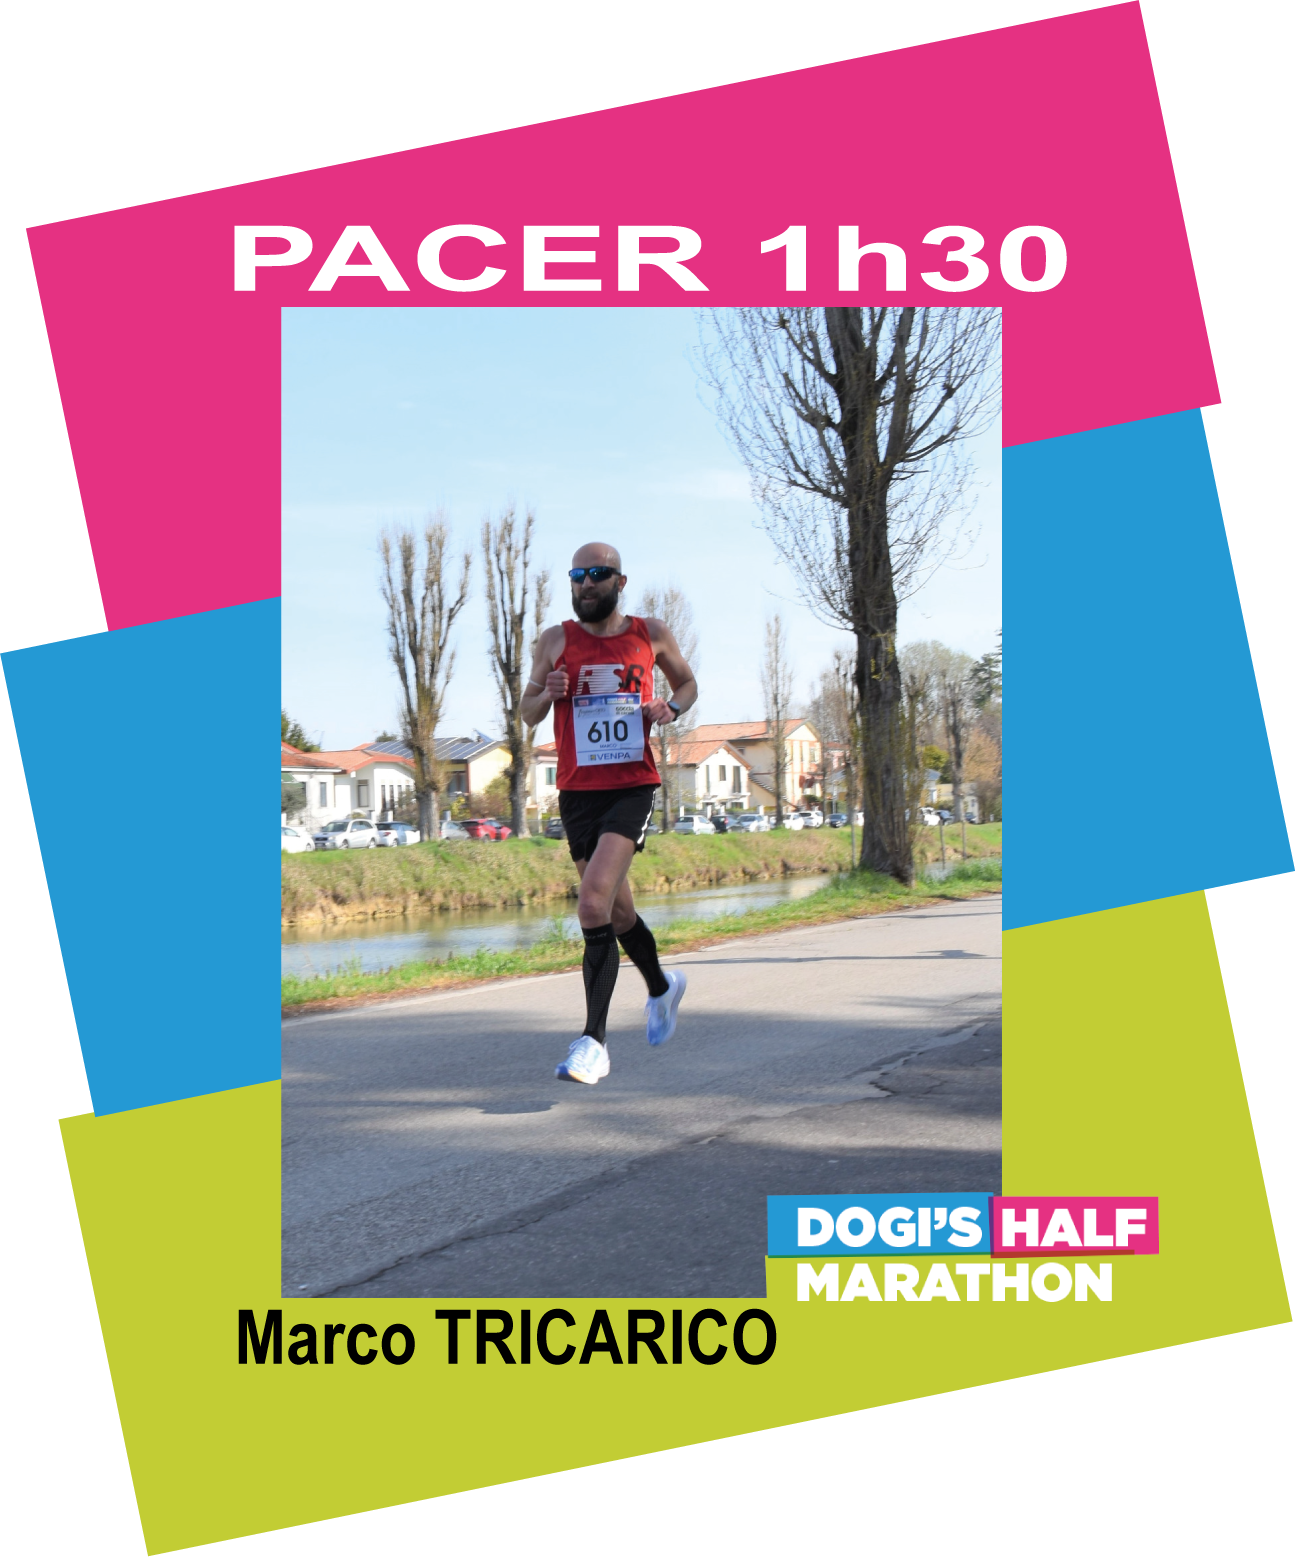 Pacer 1h30